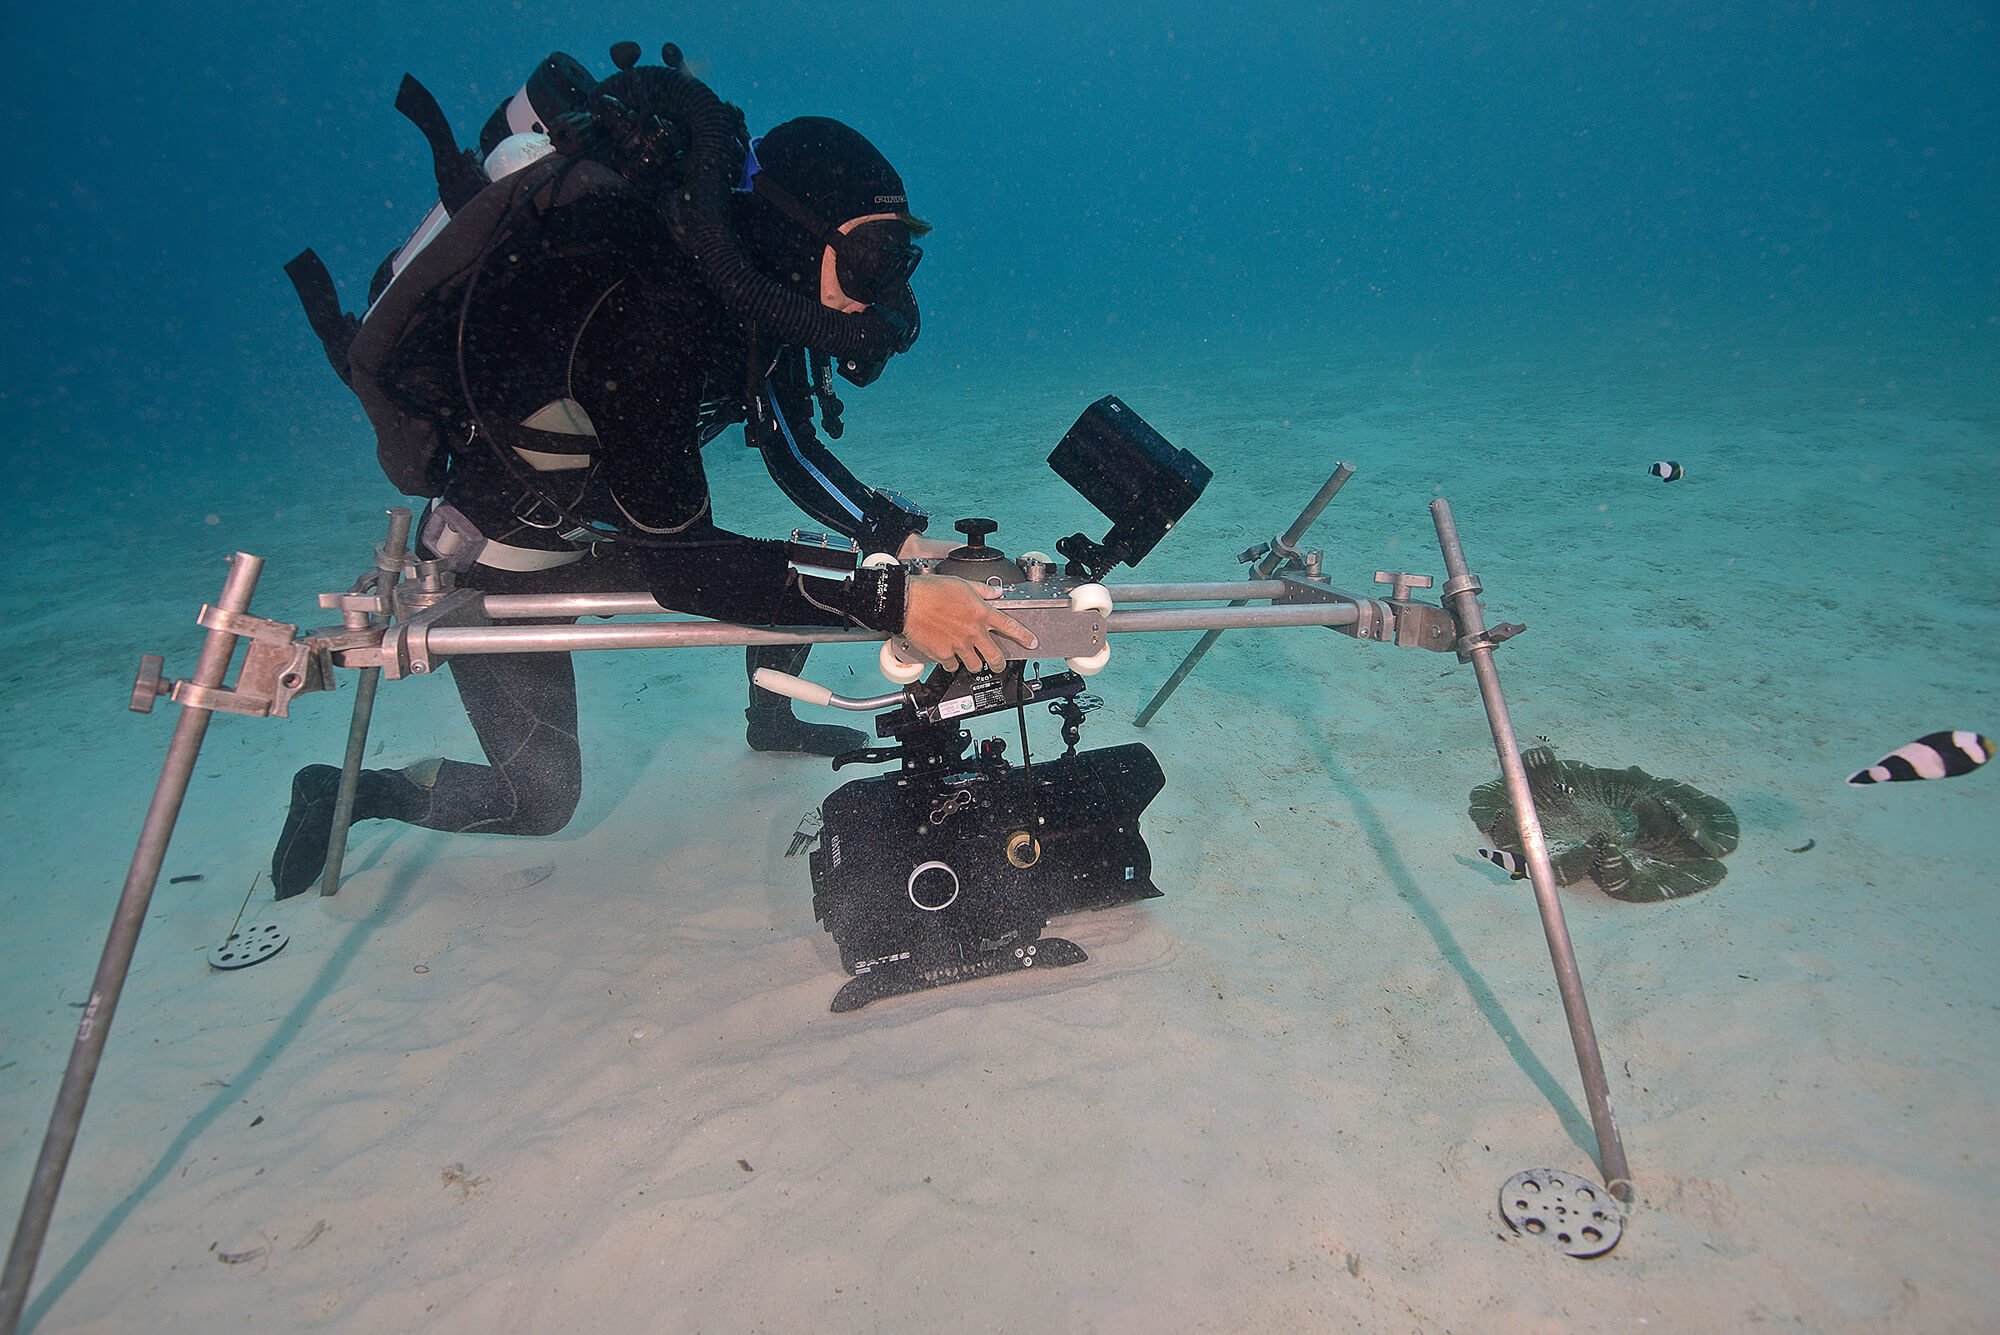 Filming Blue Planet II - an interview with cameraman Roger Munns